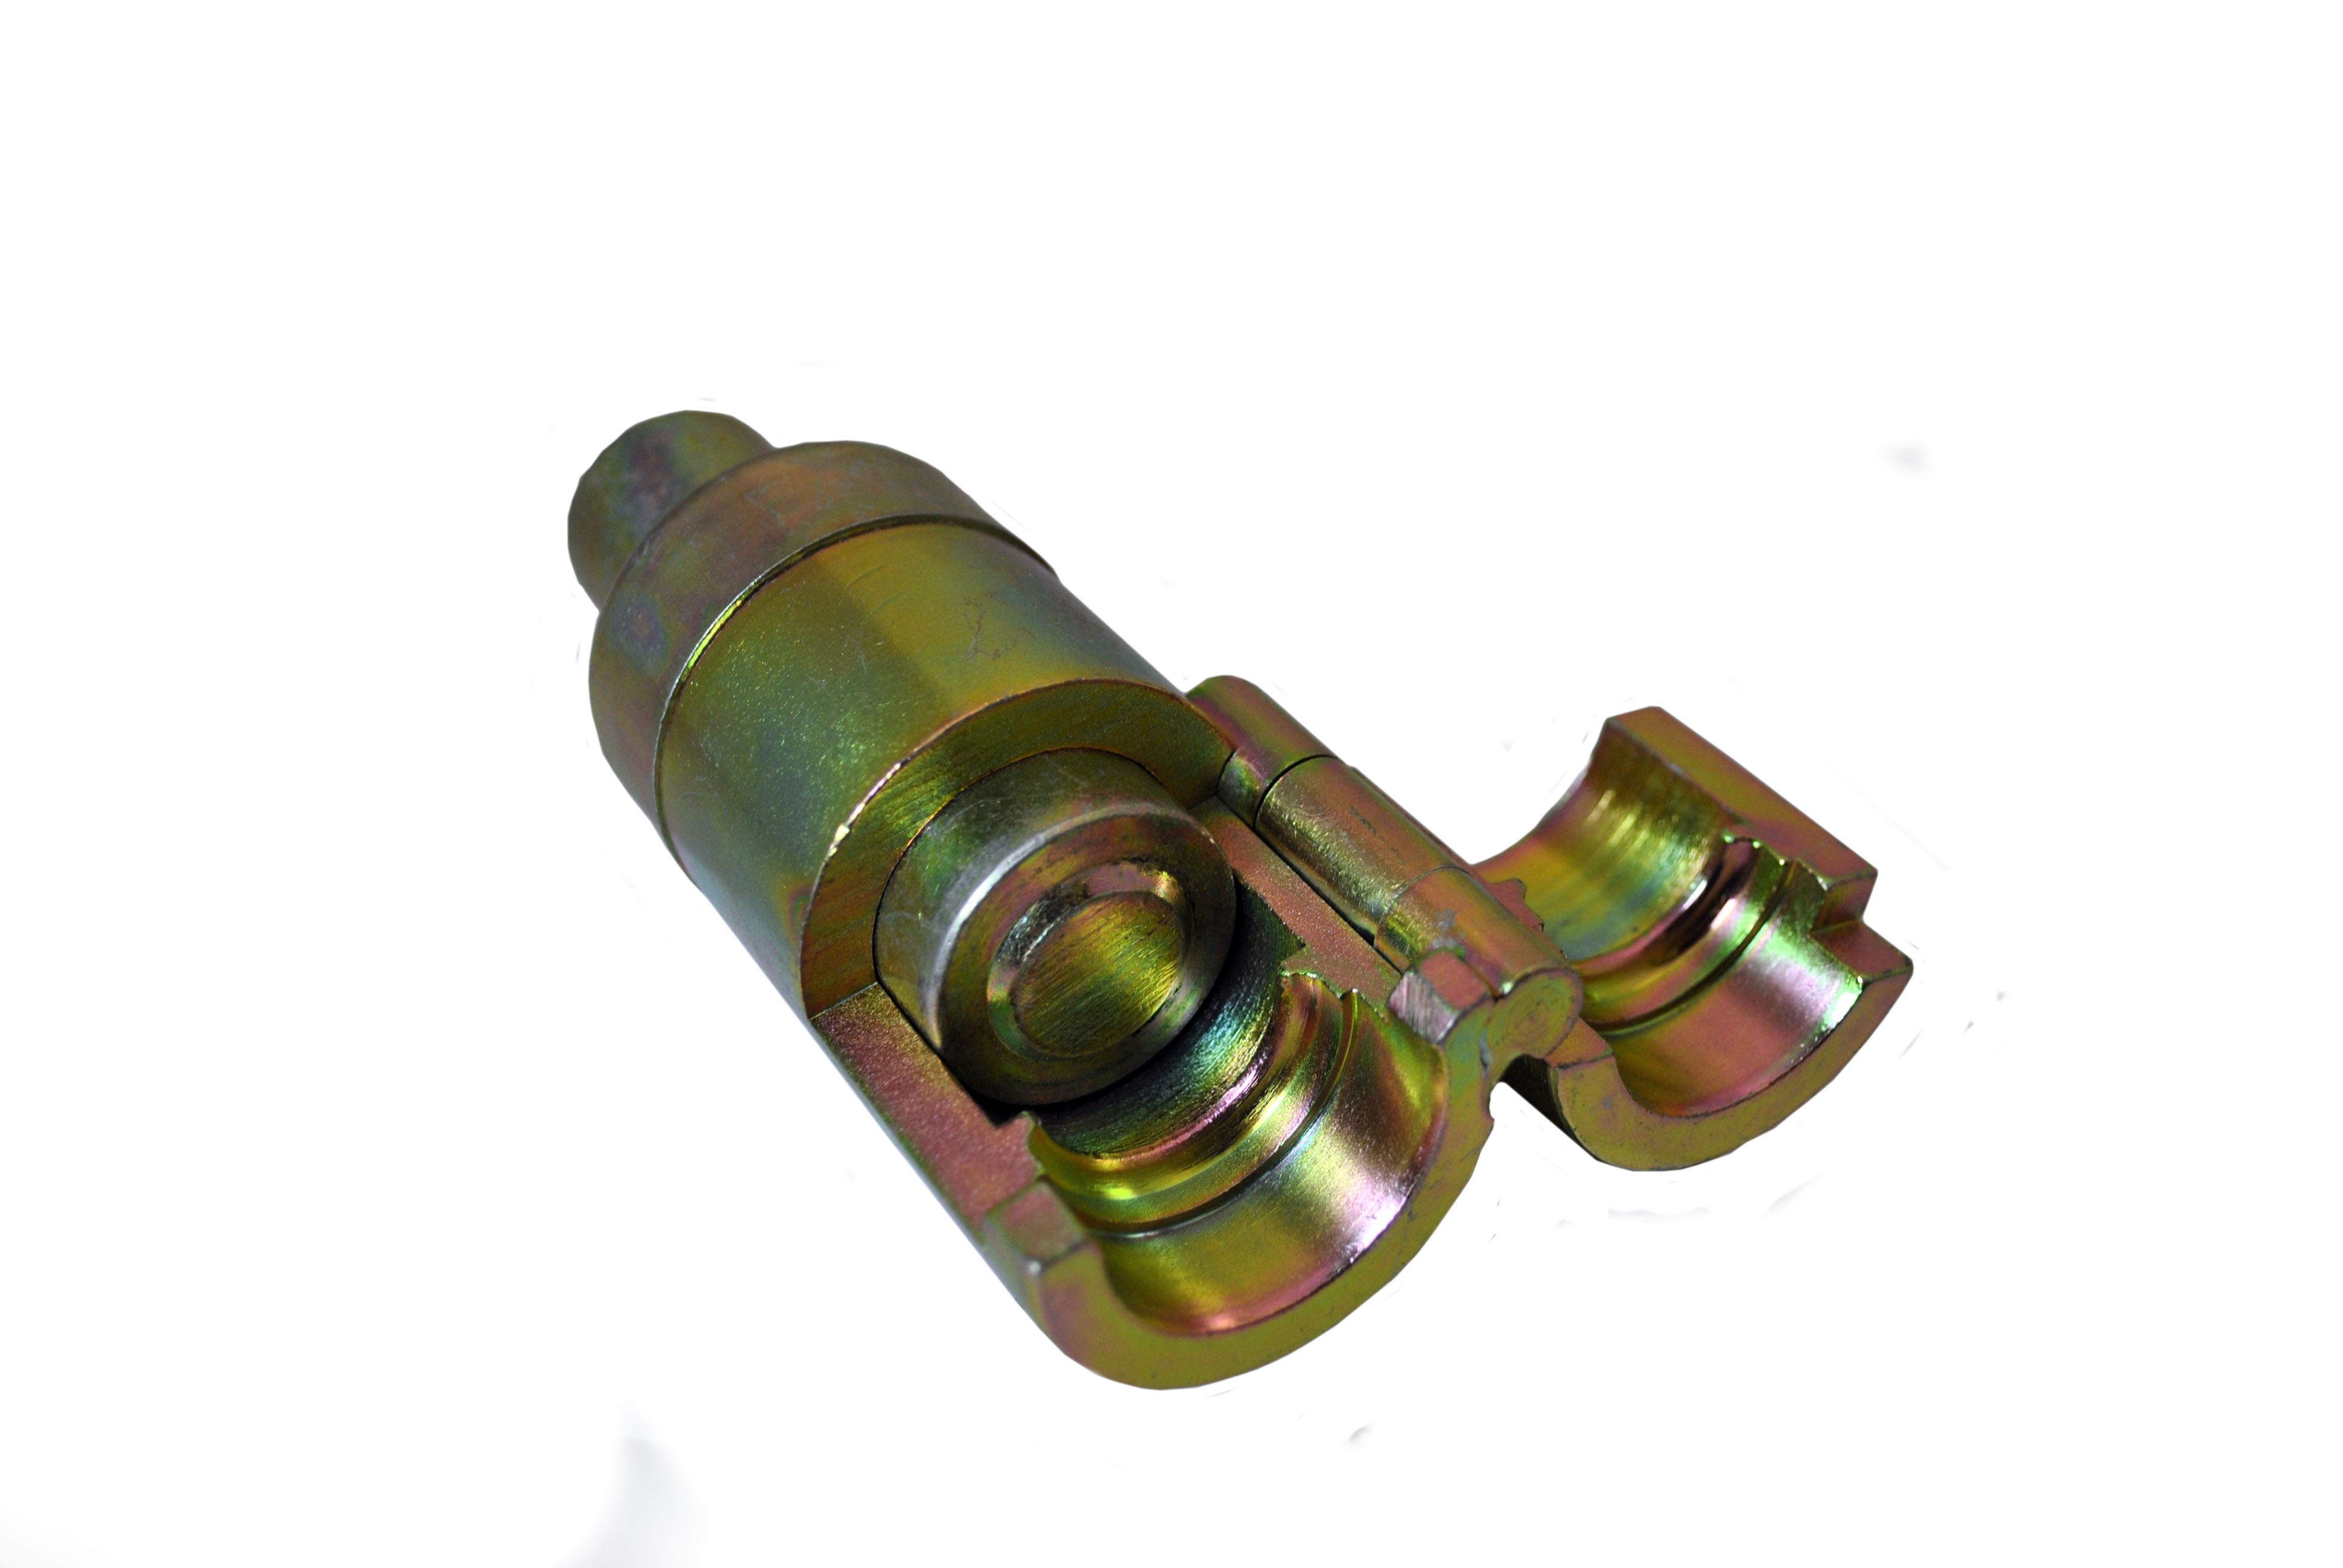 Solar Pipe Fitting Flare Tool - 1